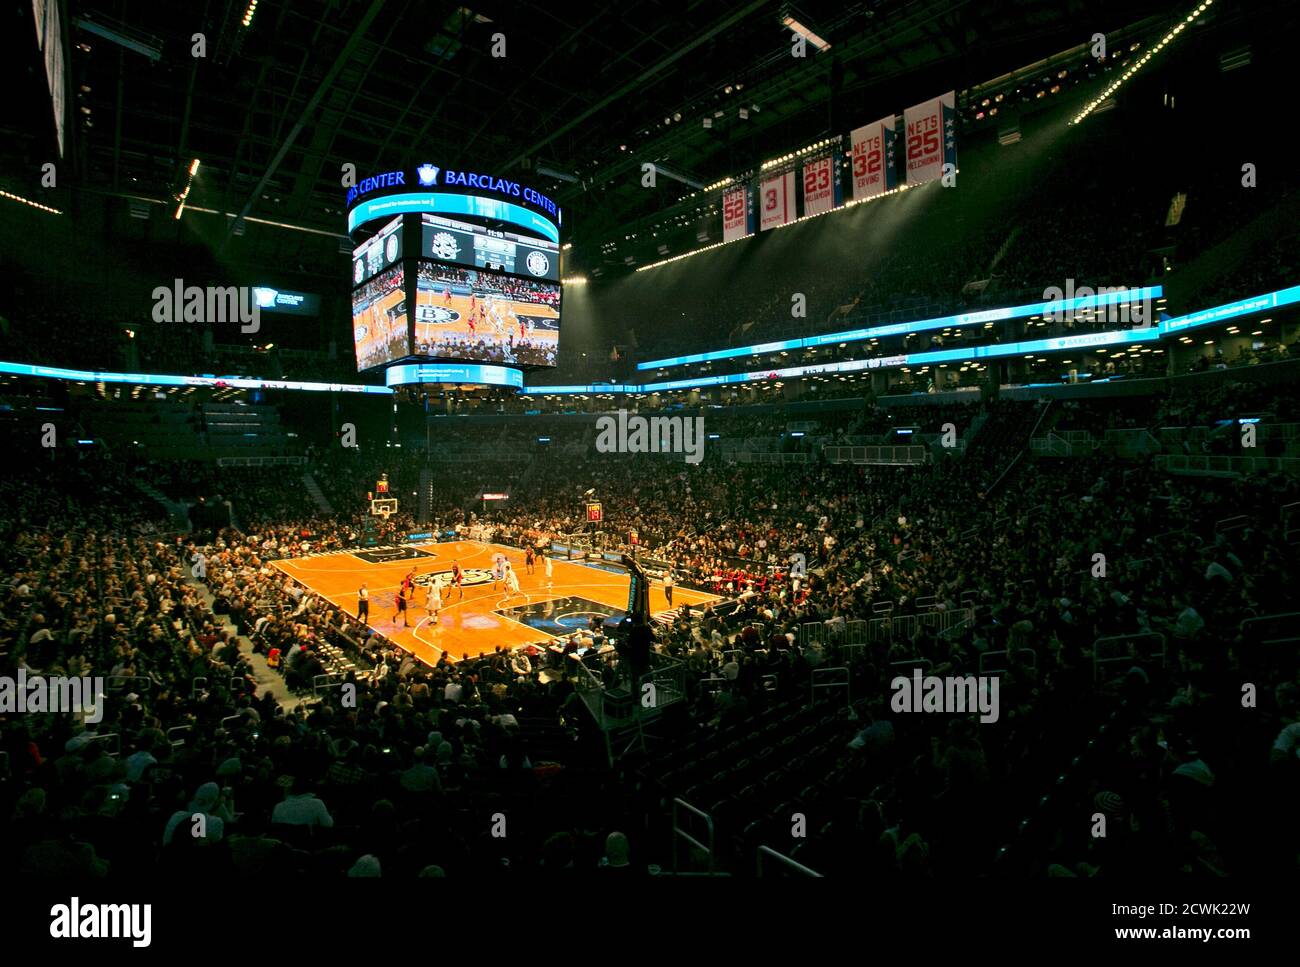 Brooklyn Barclays Center Arena High Resolution Stock Photography And Images Alamy